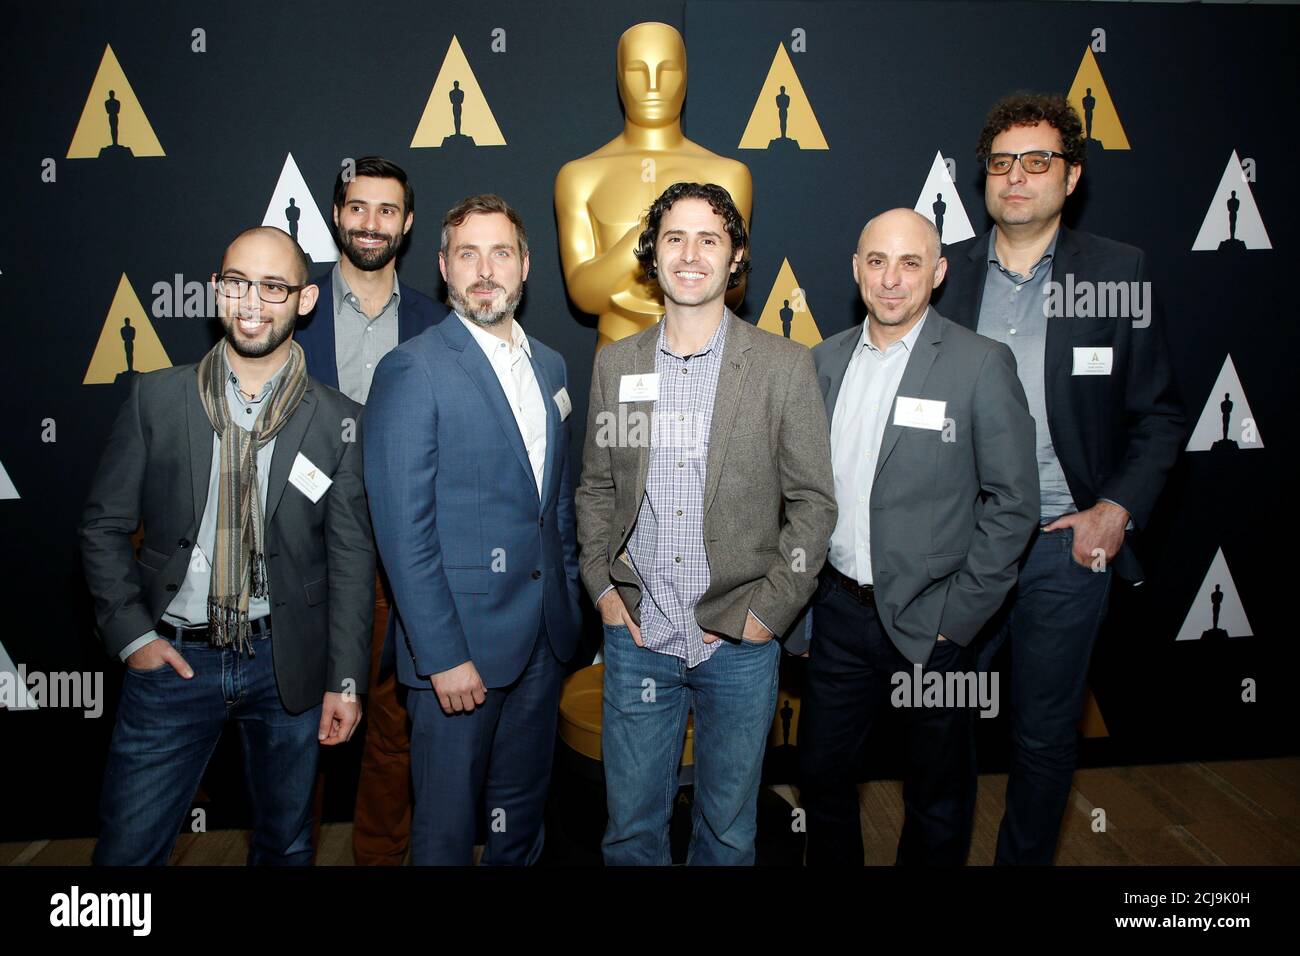 Nominees in the Short Film (Animated) category pose together during a  reception for the Academy Award nominated films in the Short Film (Animated)  and Short Film (Live Action) categories at the Academy